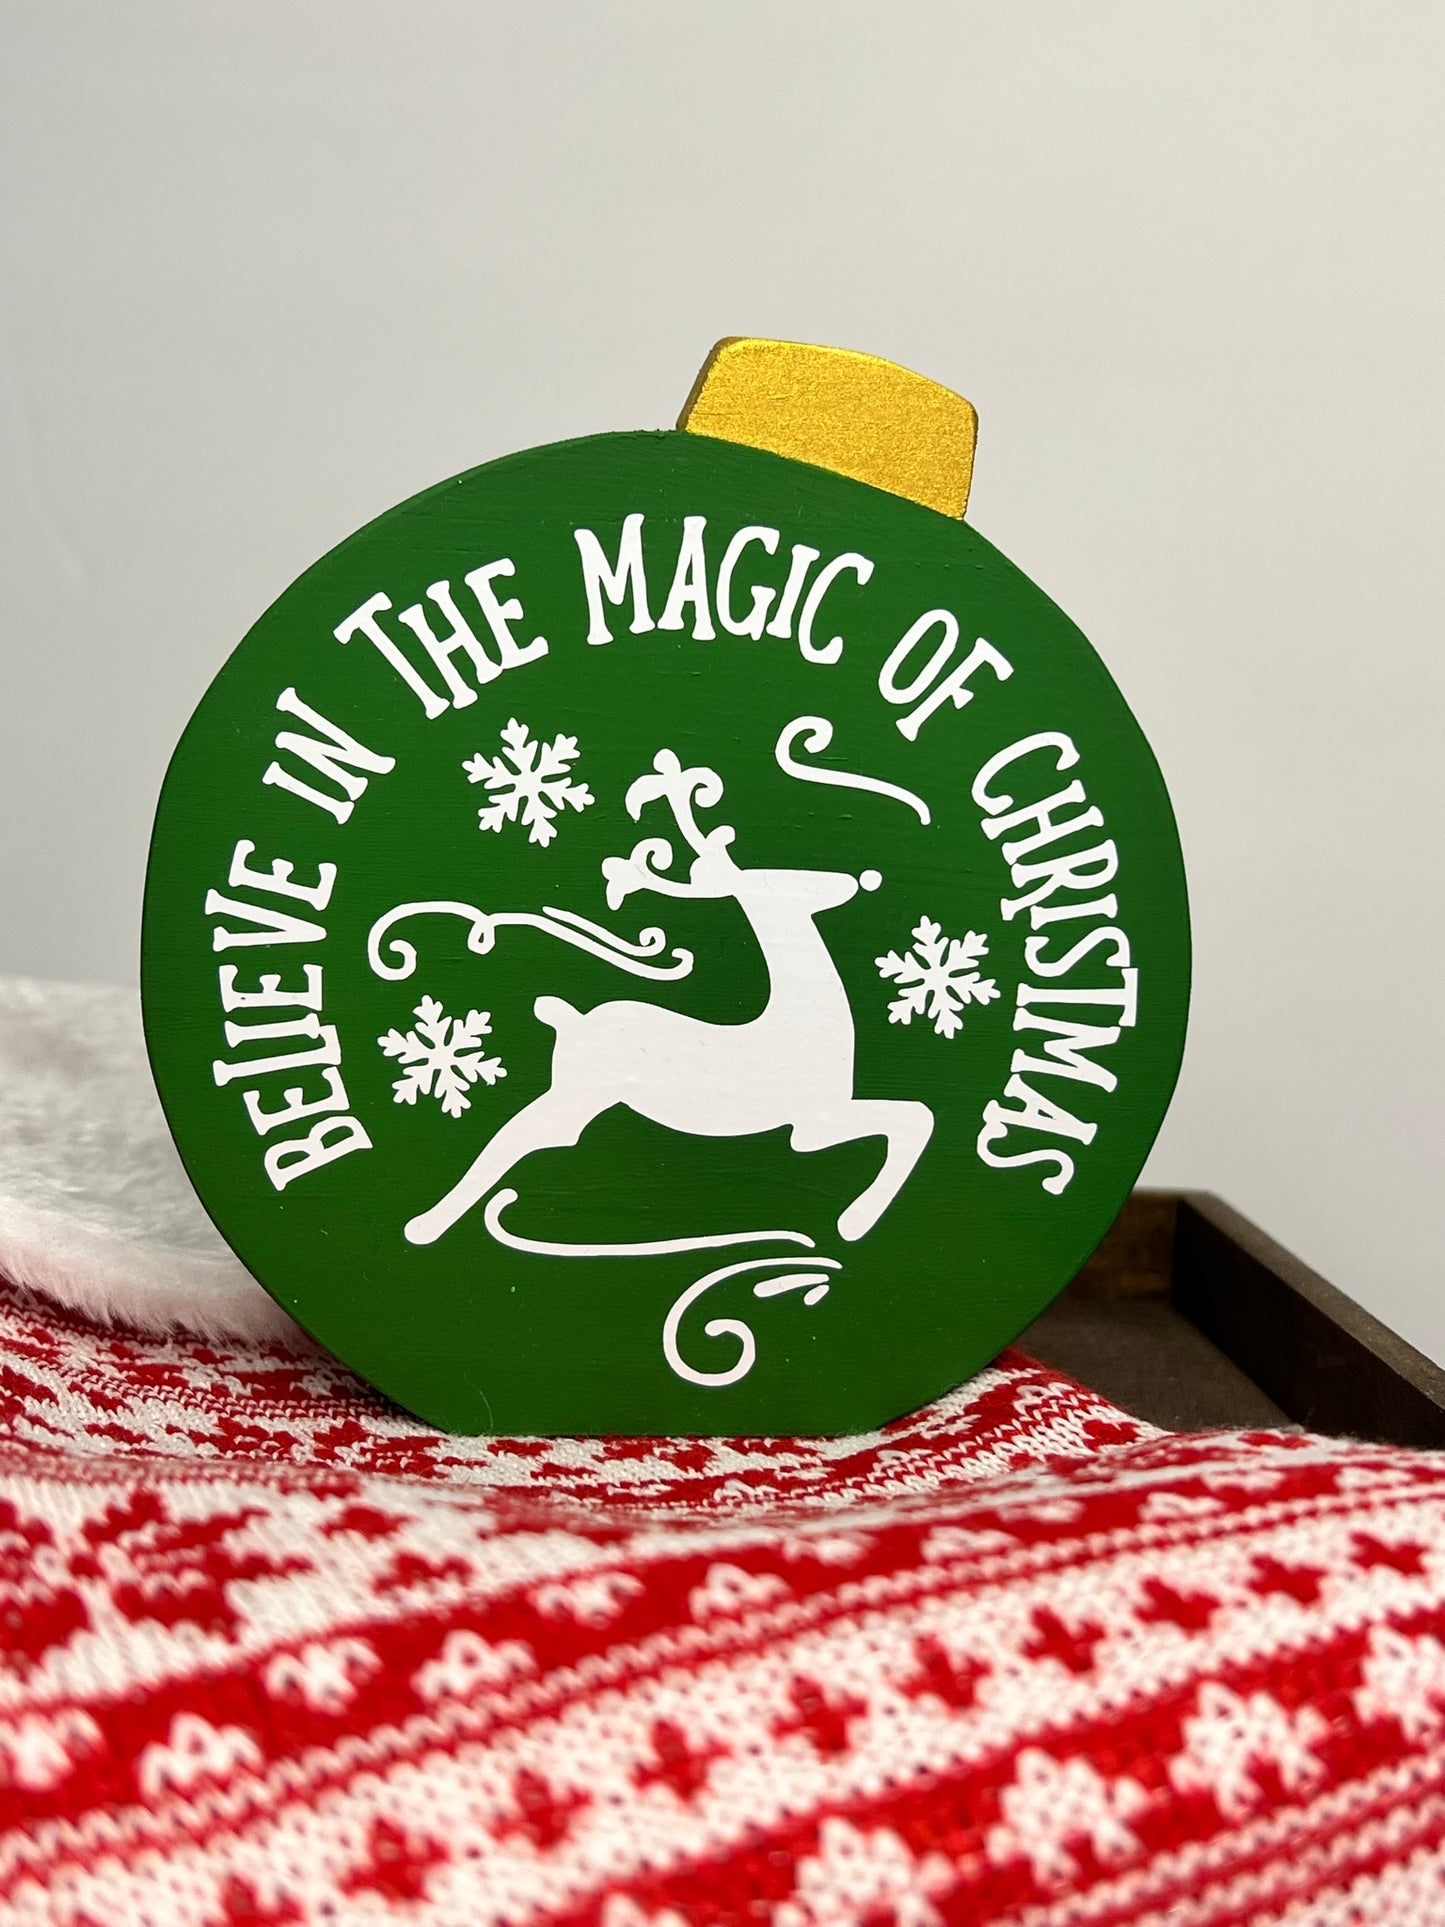 Believe in the Magic of Christmas Sign